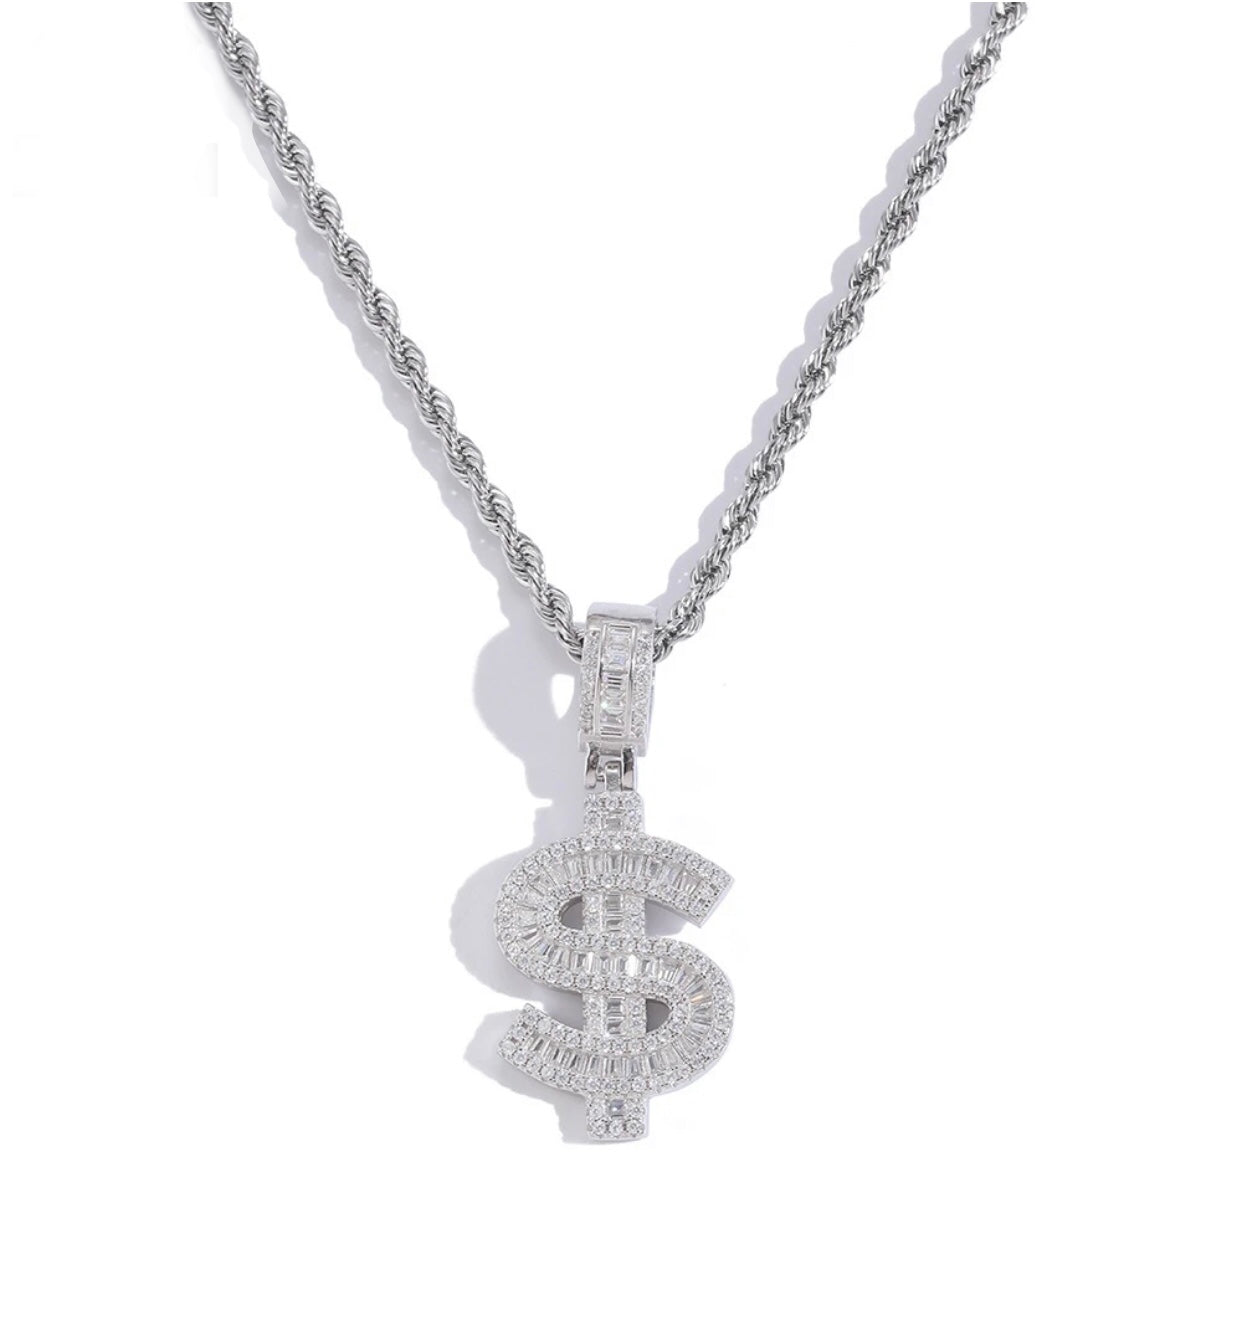 Dollar Sign Necklace – Humble Legends